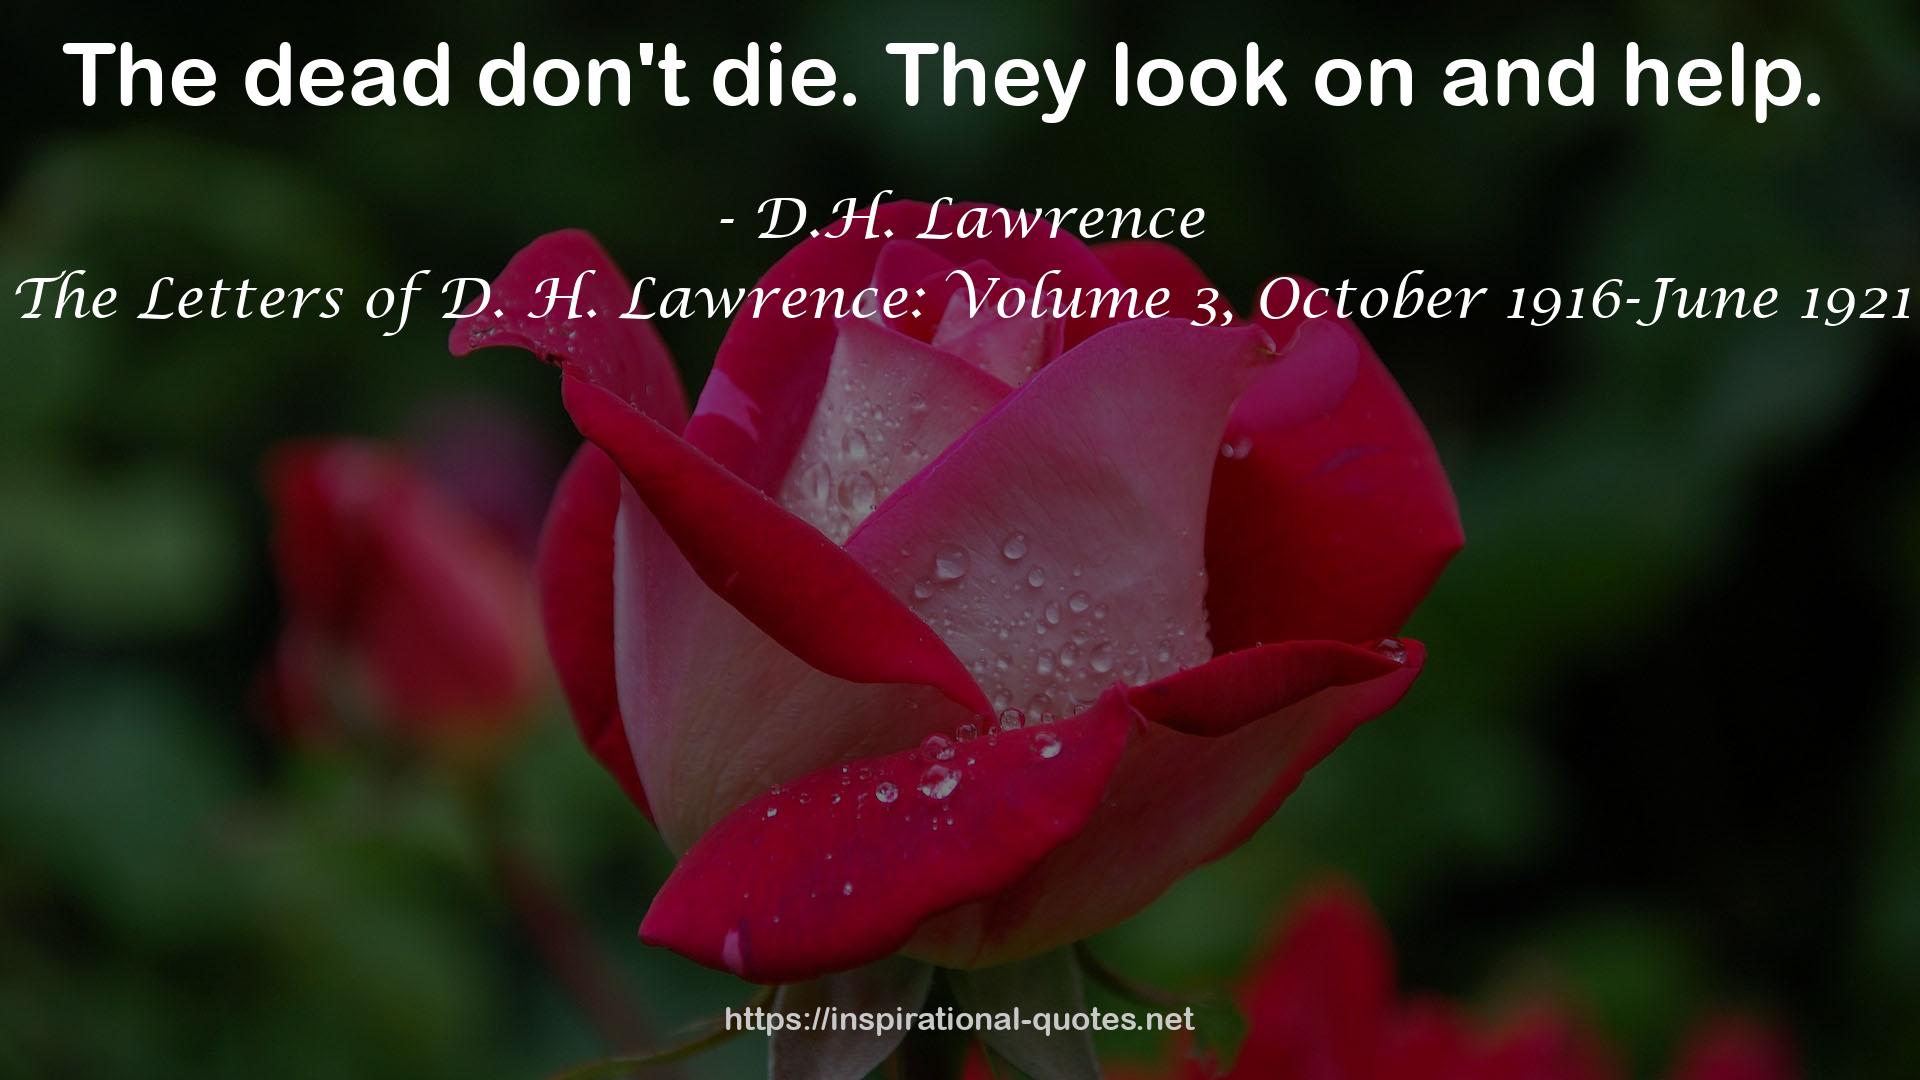 The Letters of D. H. Lawrence: Volume 3, October 1916-June 1921 QUOTES